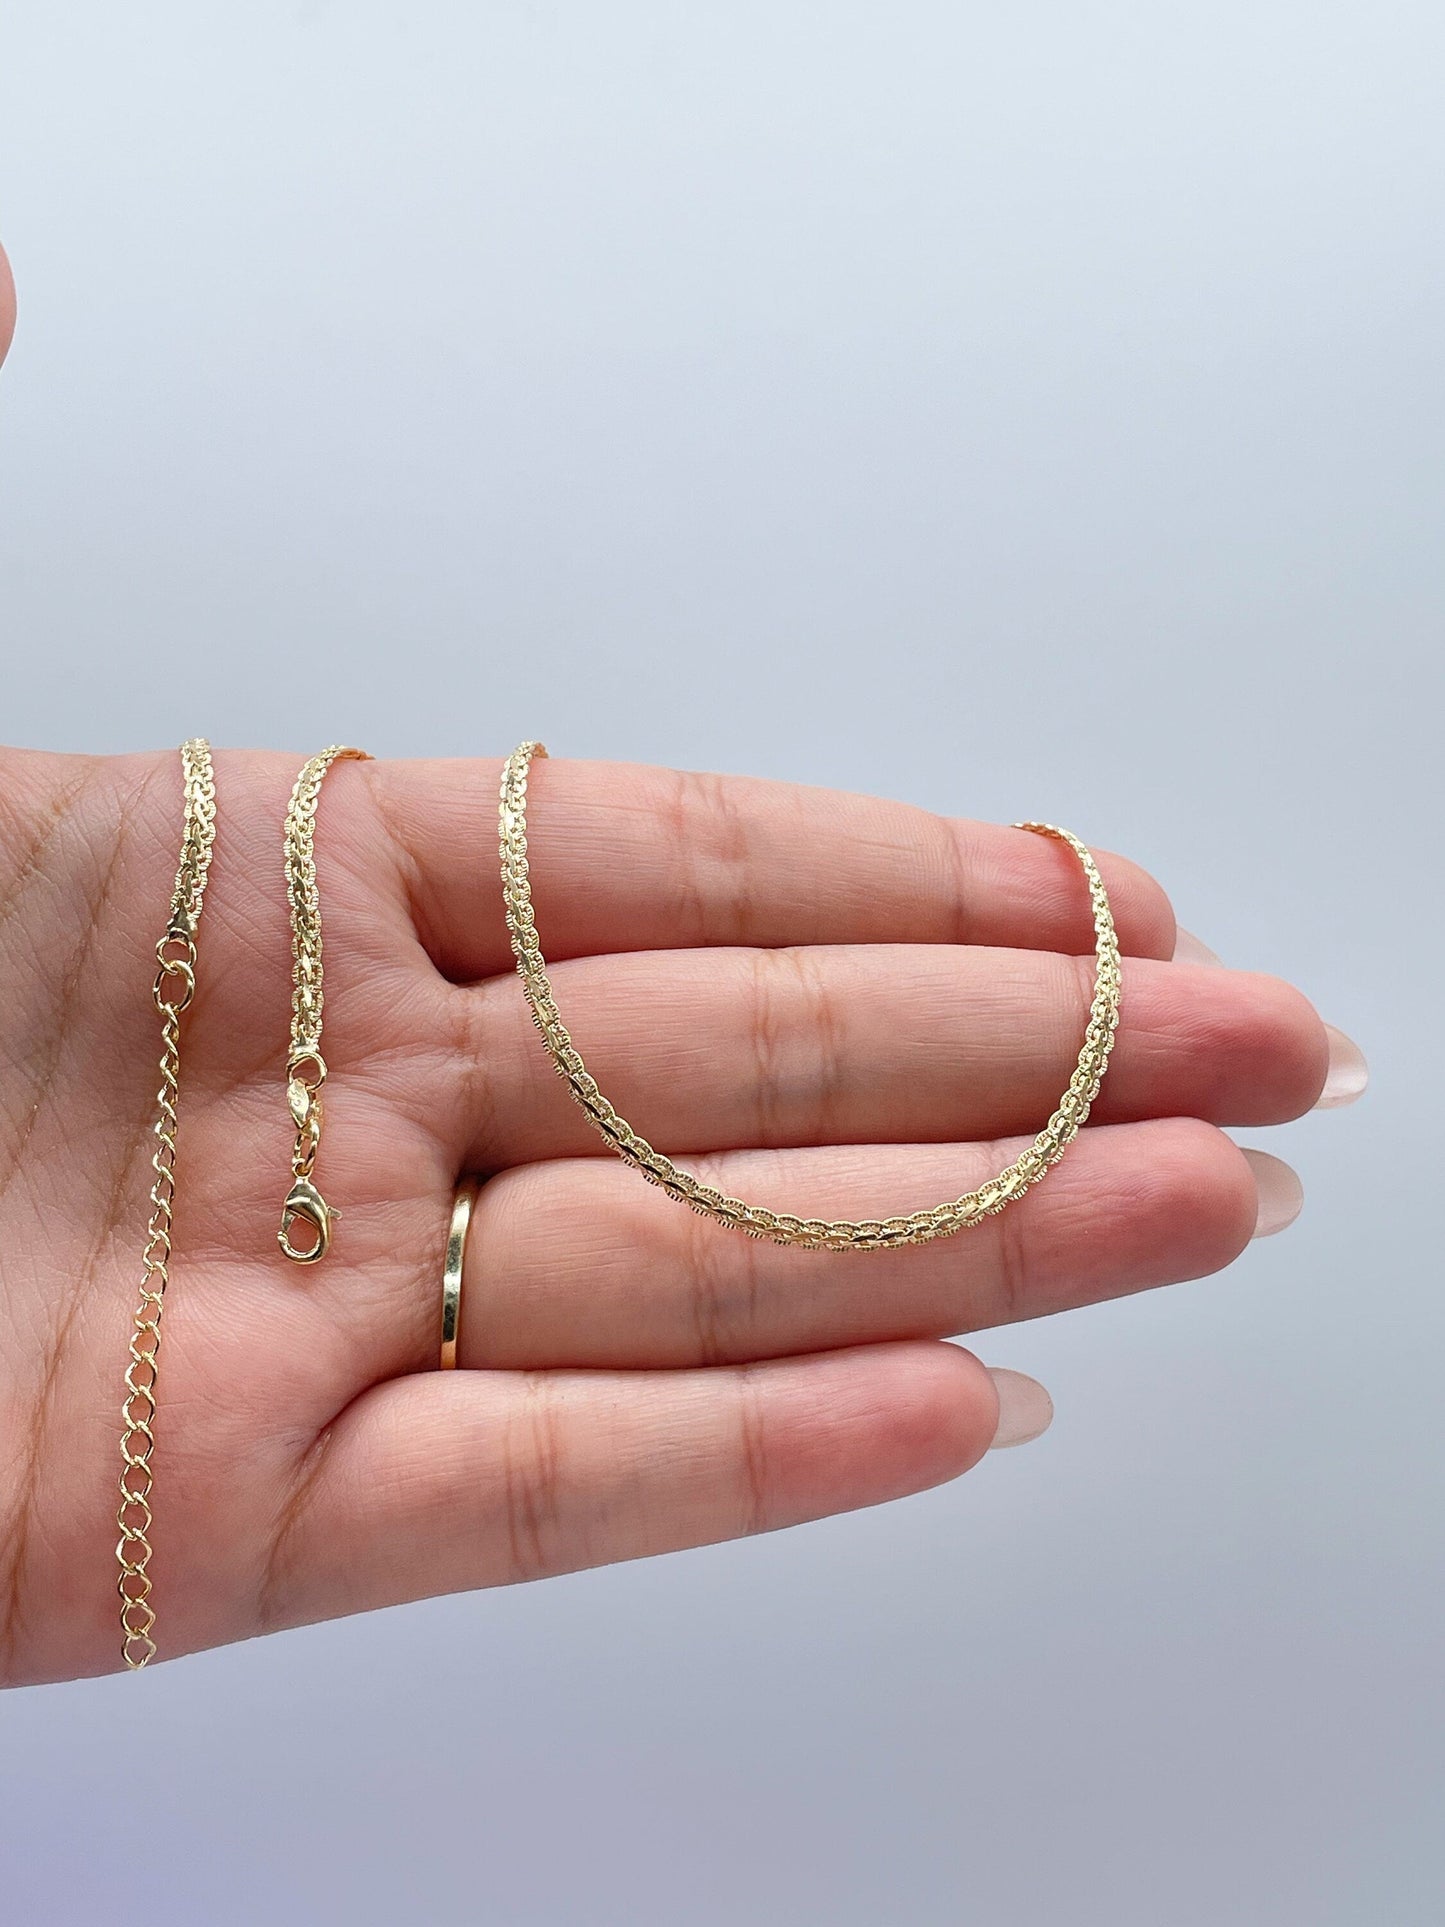 18k Gold Filled 2mm 16 Inch Flat Braid Snake Textured Chain, Necklace For Wholesale, Gift Ideas, Dainty Jewlery, Layering Necklace,